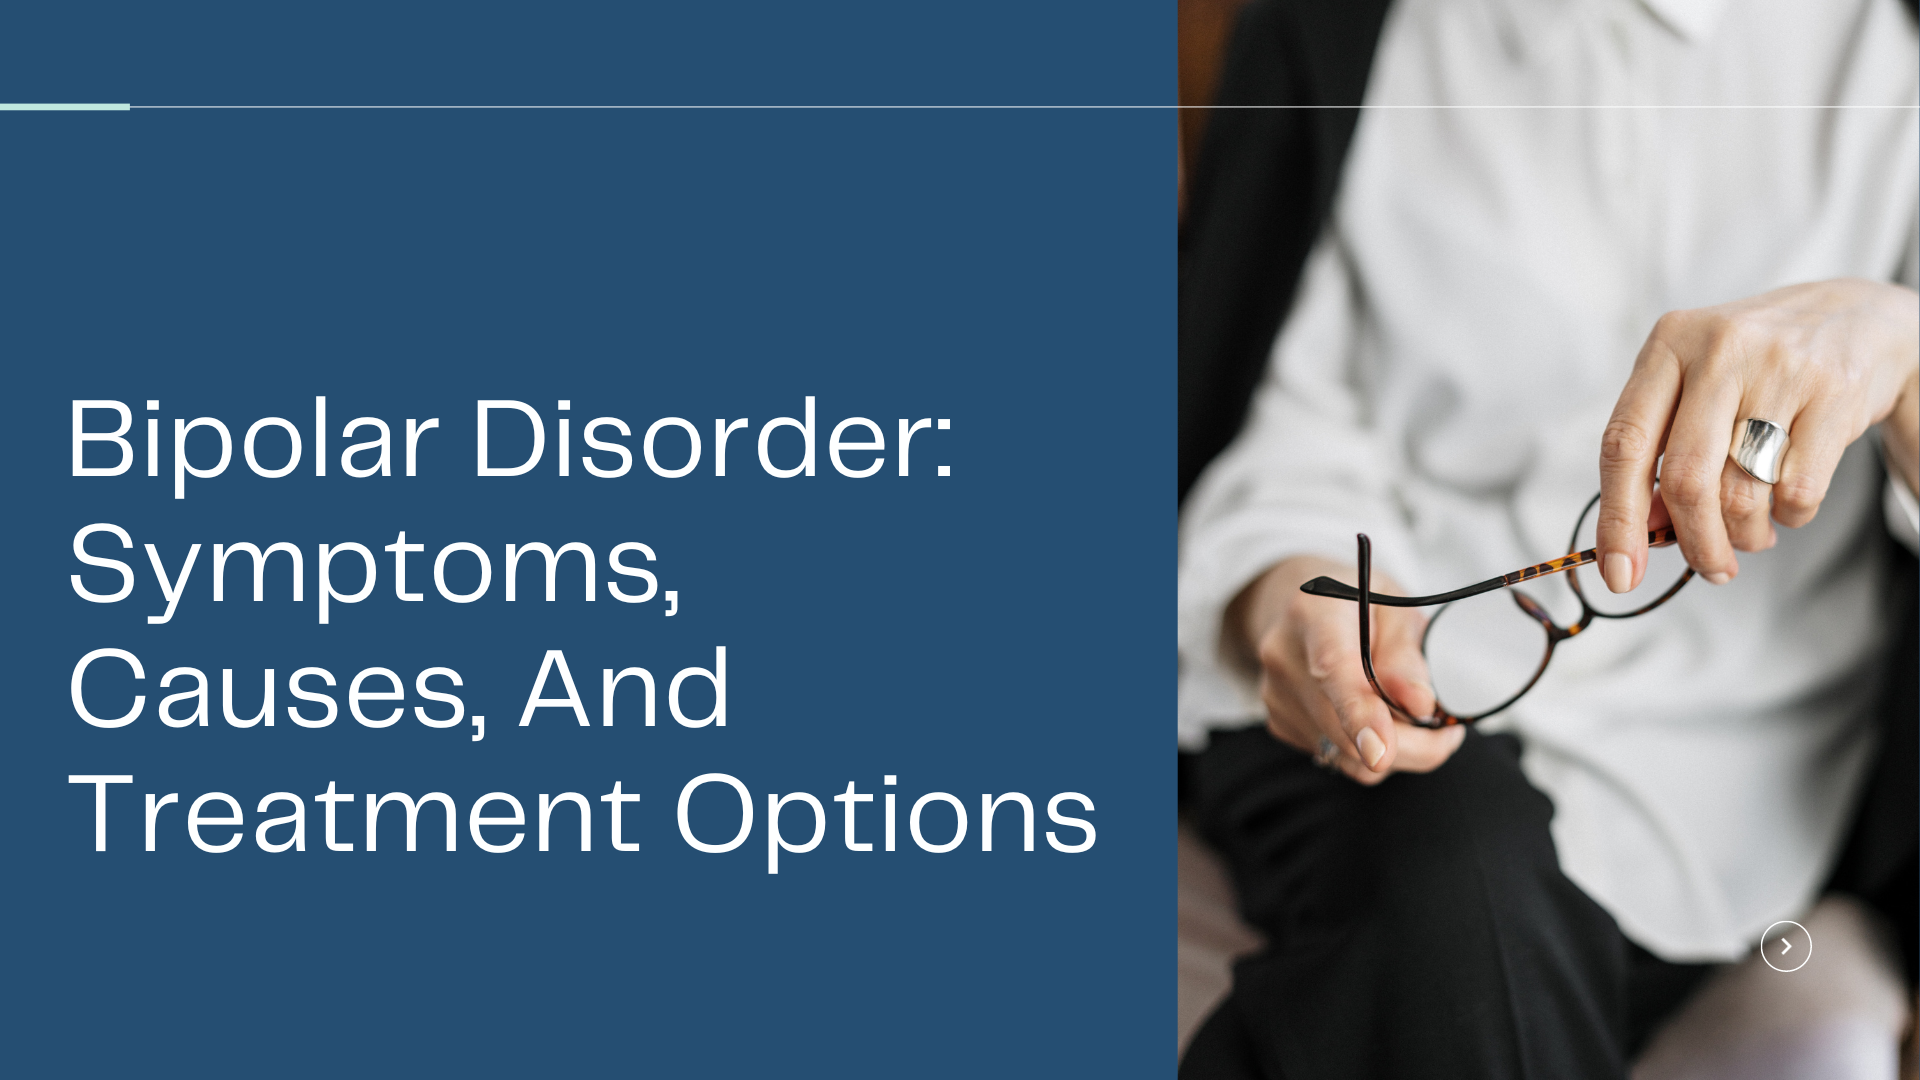 Bipolar Disorder: Symptoms, Causes, And Treatment Options